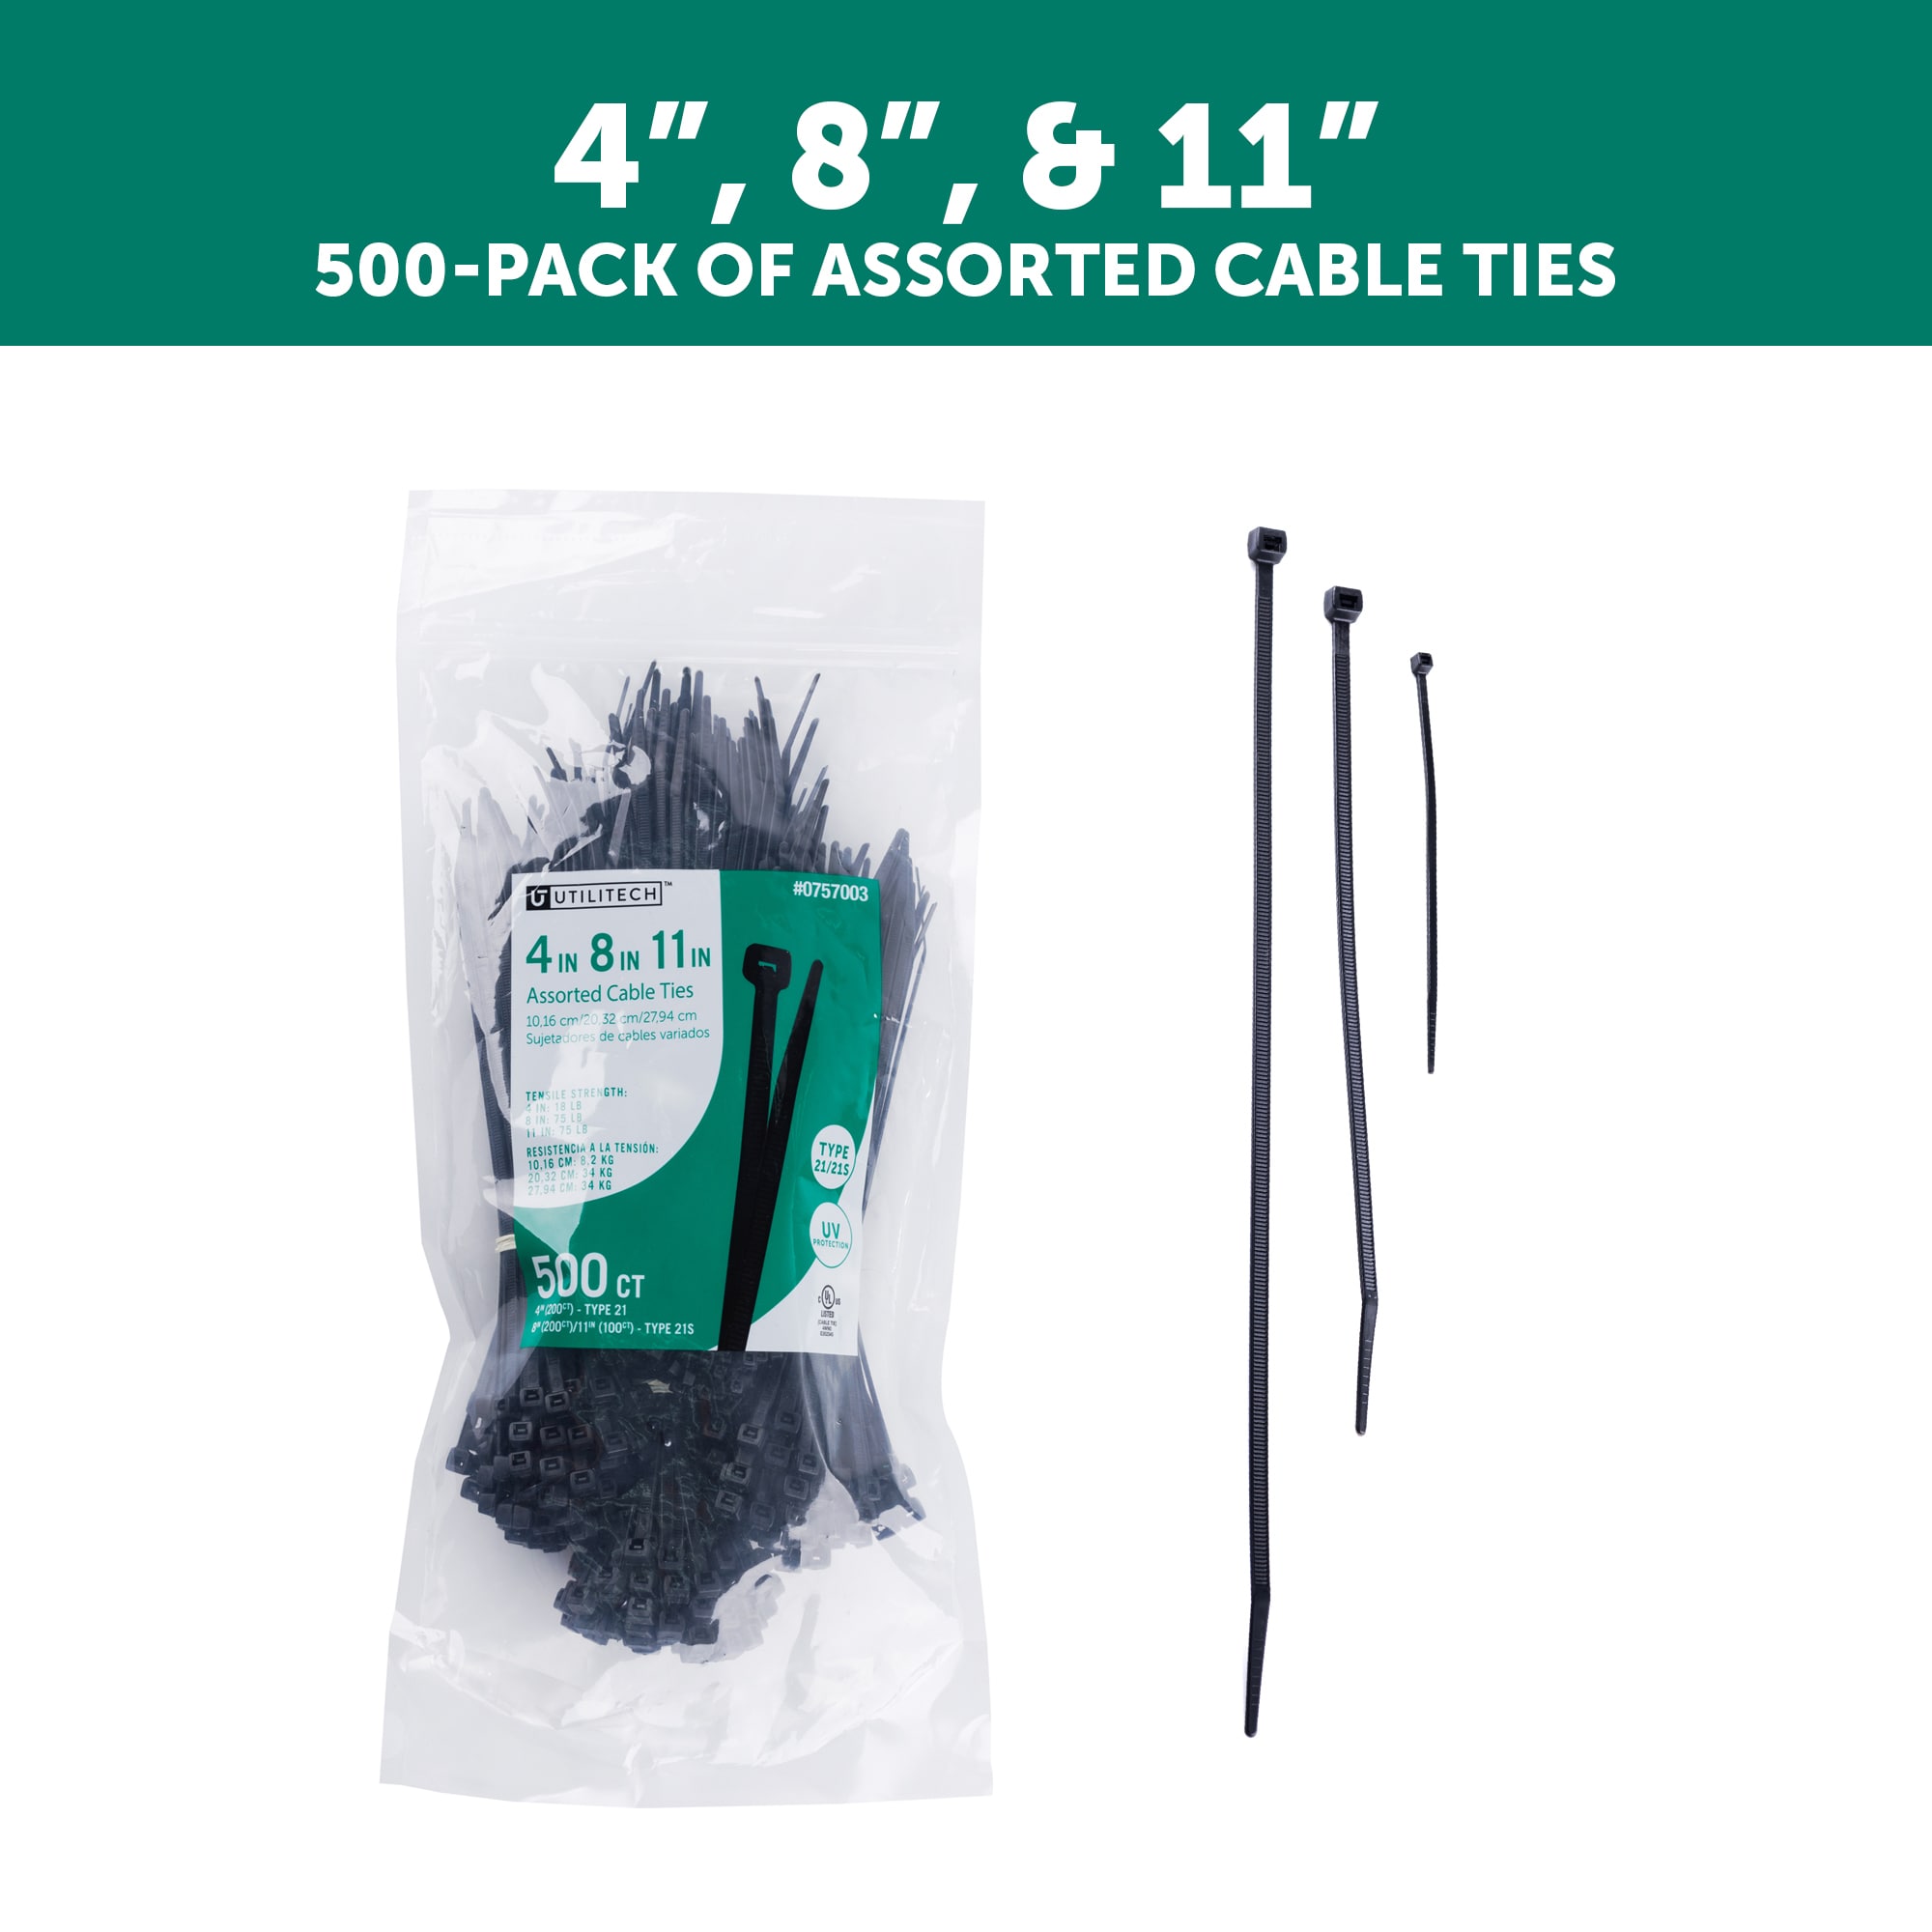 Utilitech 15-Pack 24-in Nylon Cable Ties SGY-CT6